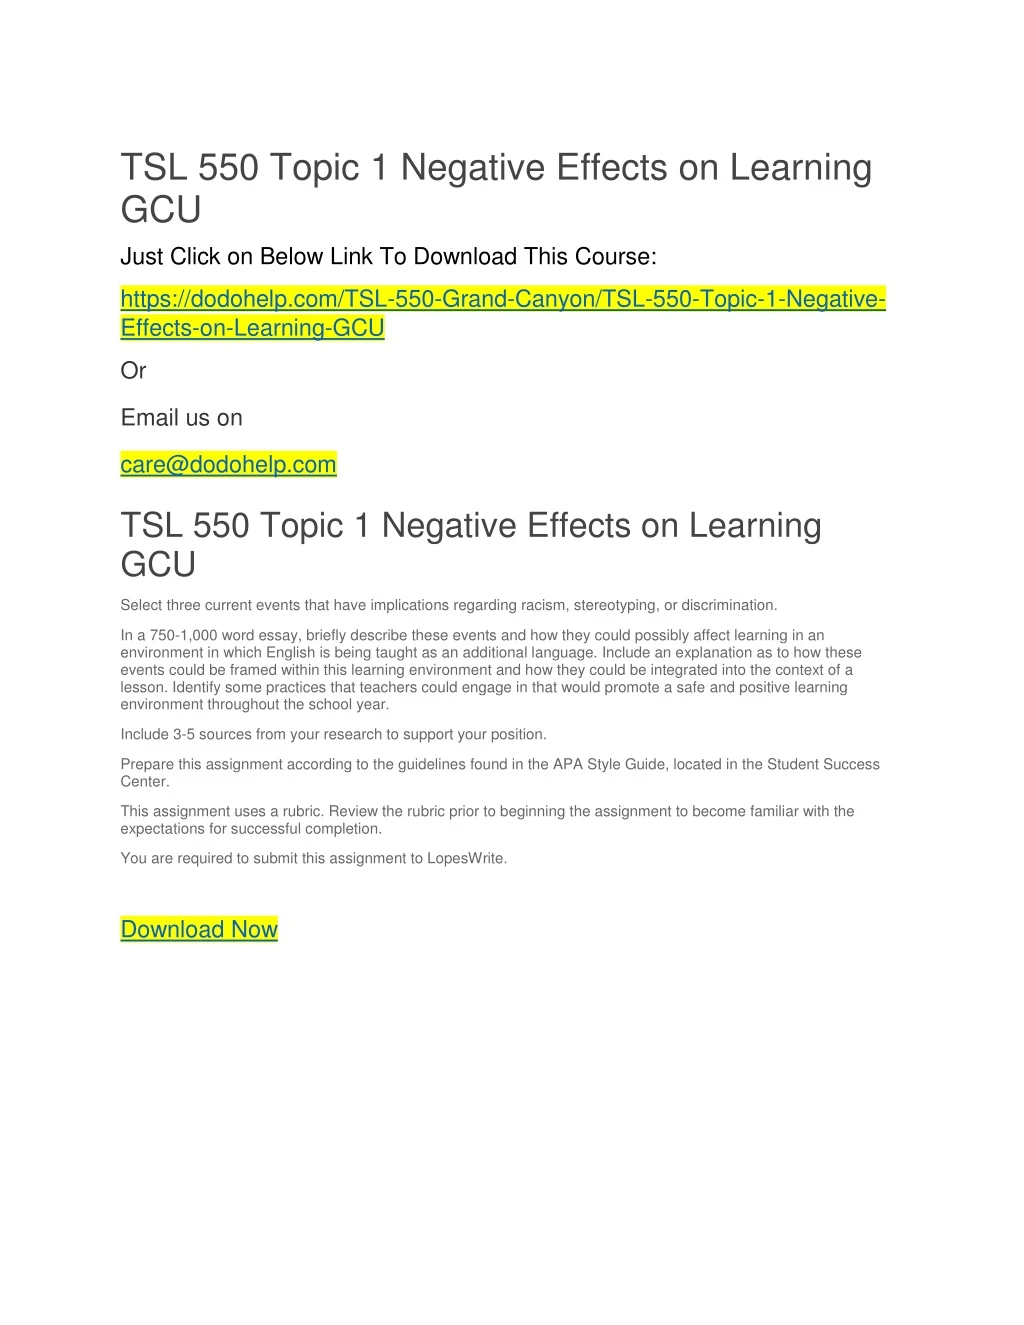 tsl 550 topic 1 negative effects on learning